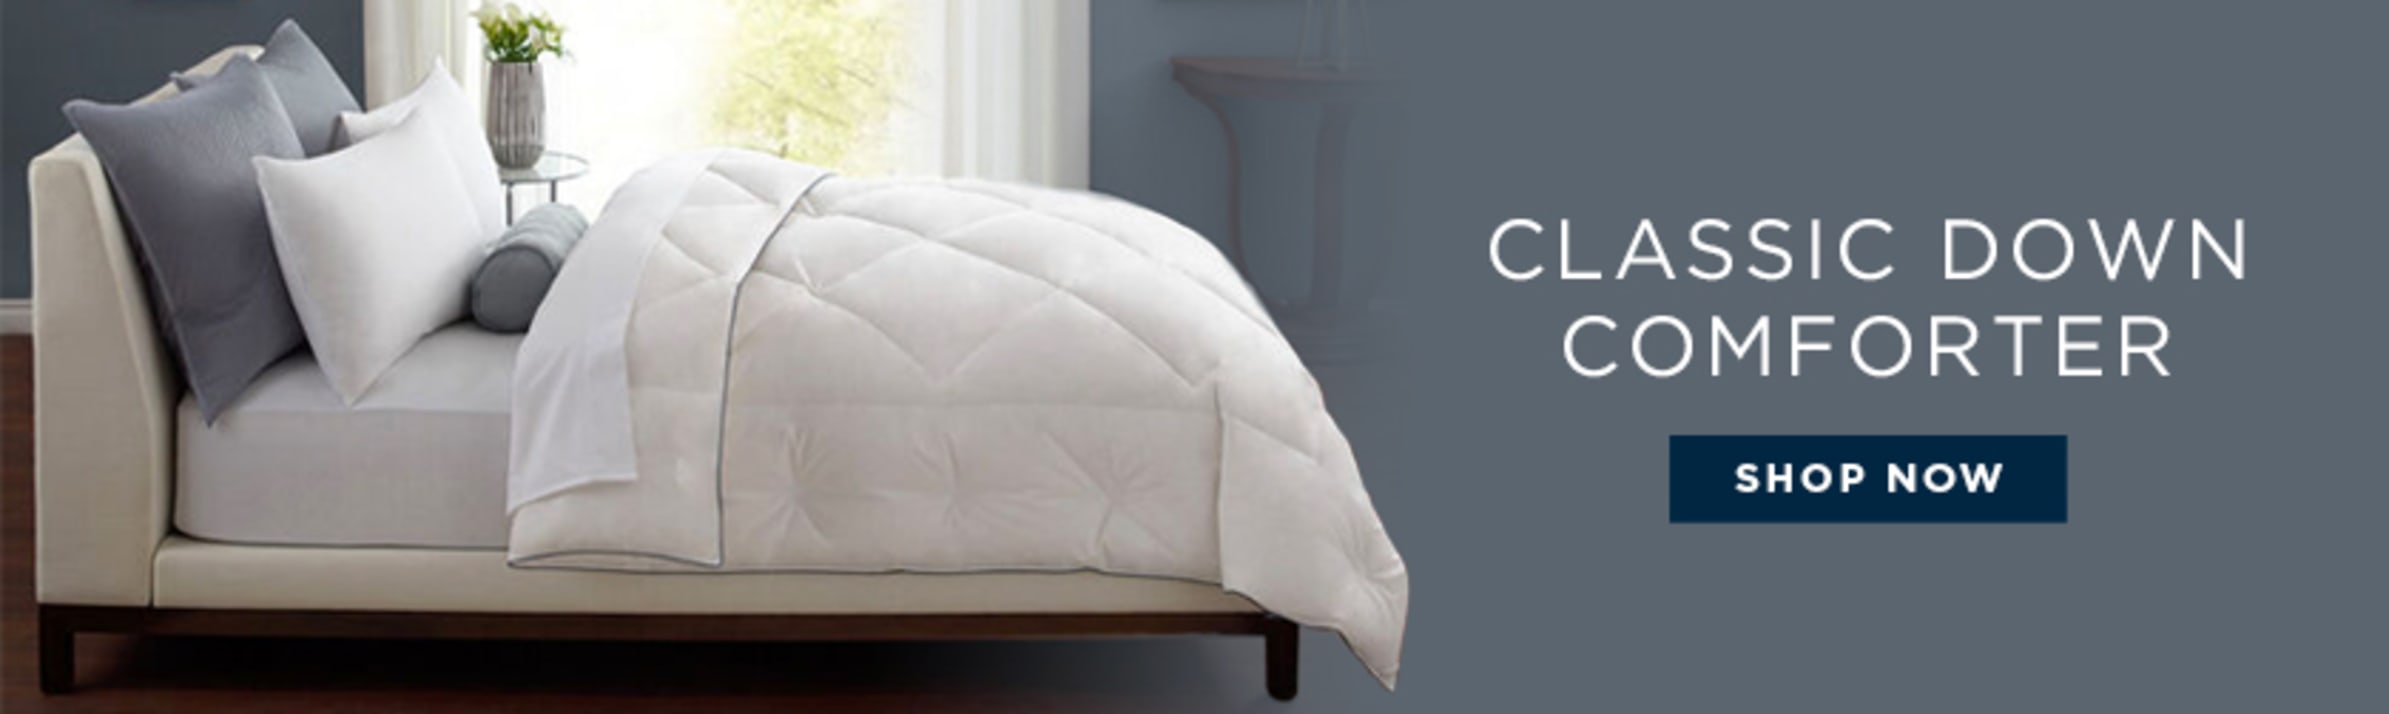 GTM Stores - With so many pillow options it's easy relaxing this